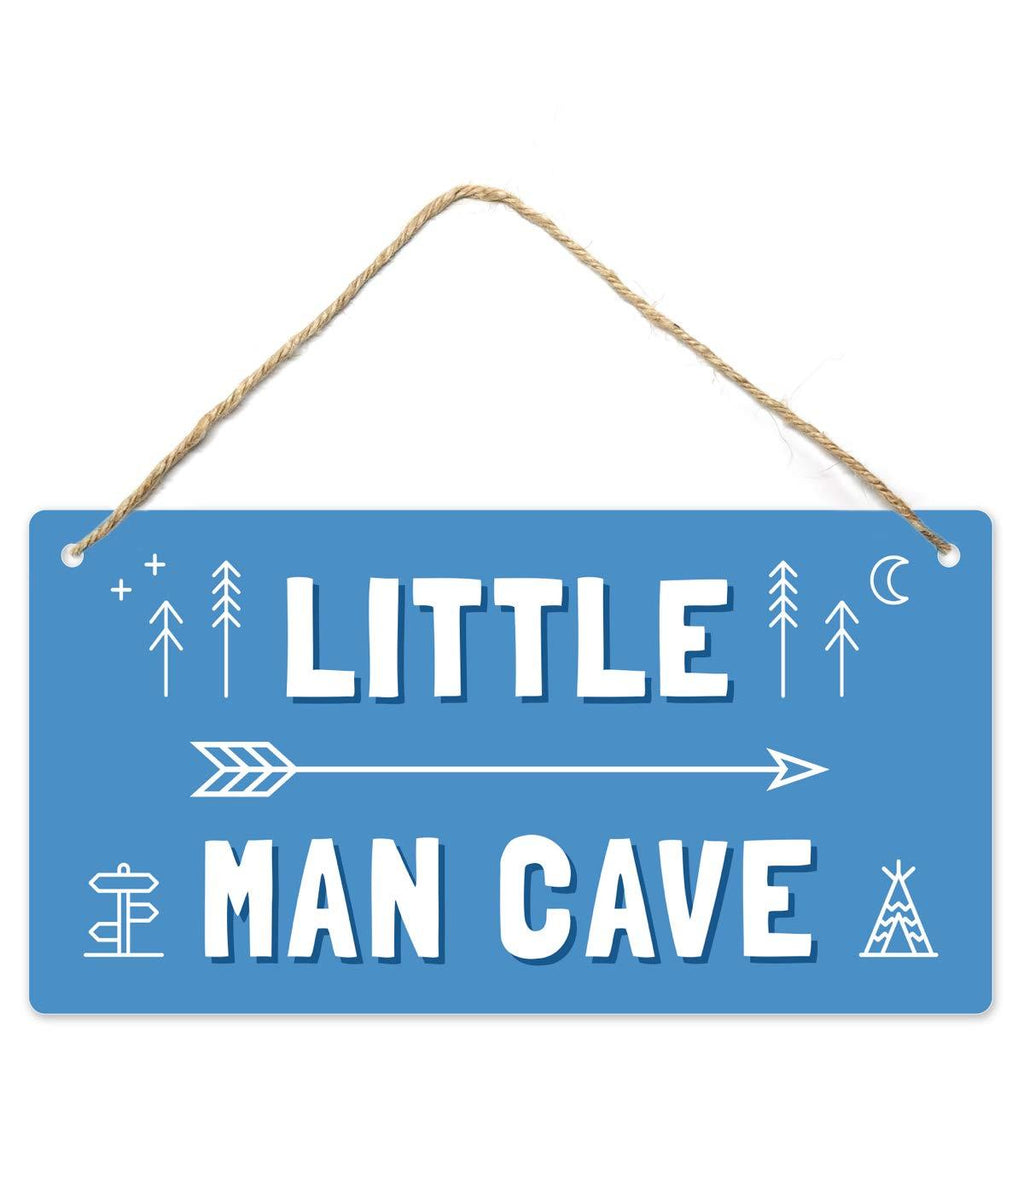 Little Man Cave, Toddler Boy Room Decor, 12″x6″ PVC Plastic Decoration Hanging Sign, High Precision Printing, Water proof, Kids Room Signs For Door, Boy Decor For Bedroom, Boys Only Sign For Room Boys